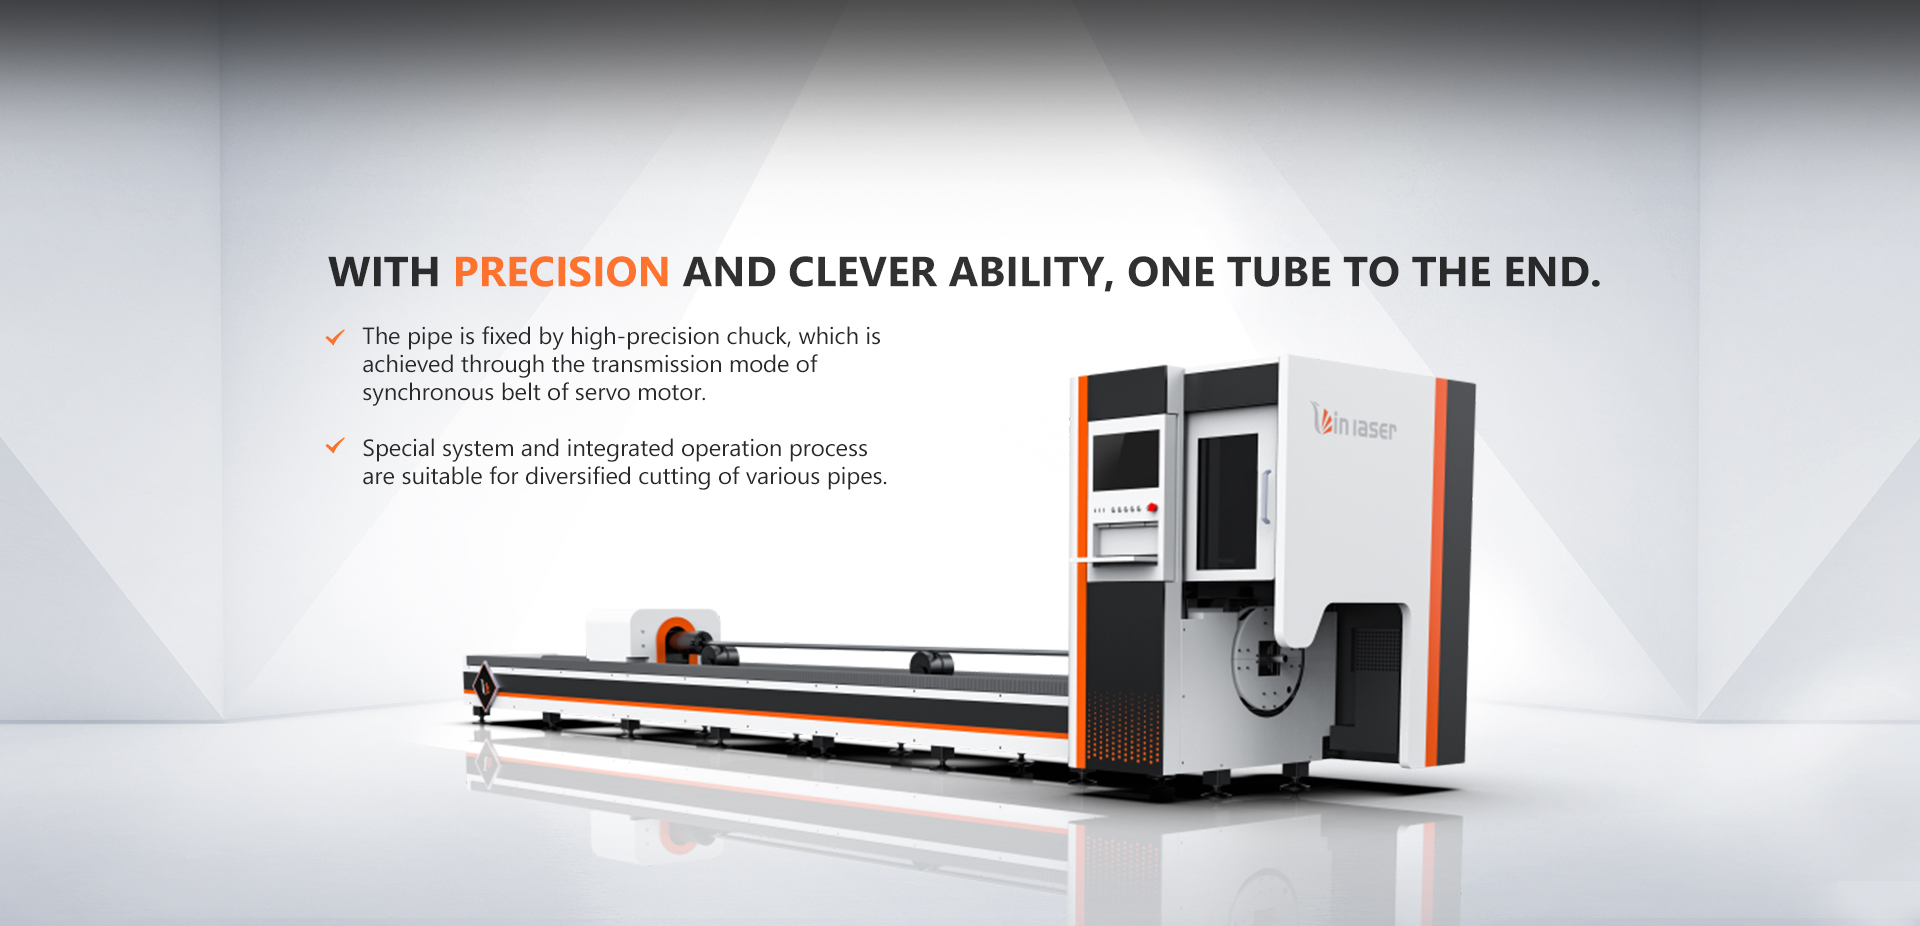 Blade Cleaner, Cnc Router, Co2 Laser Cutting&Engraving Machine - Lin Laser